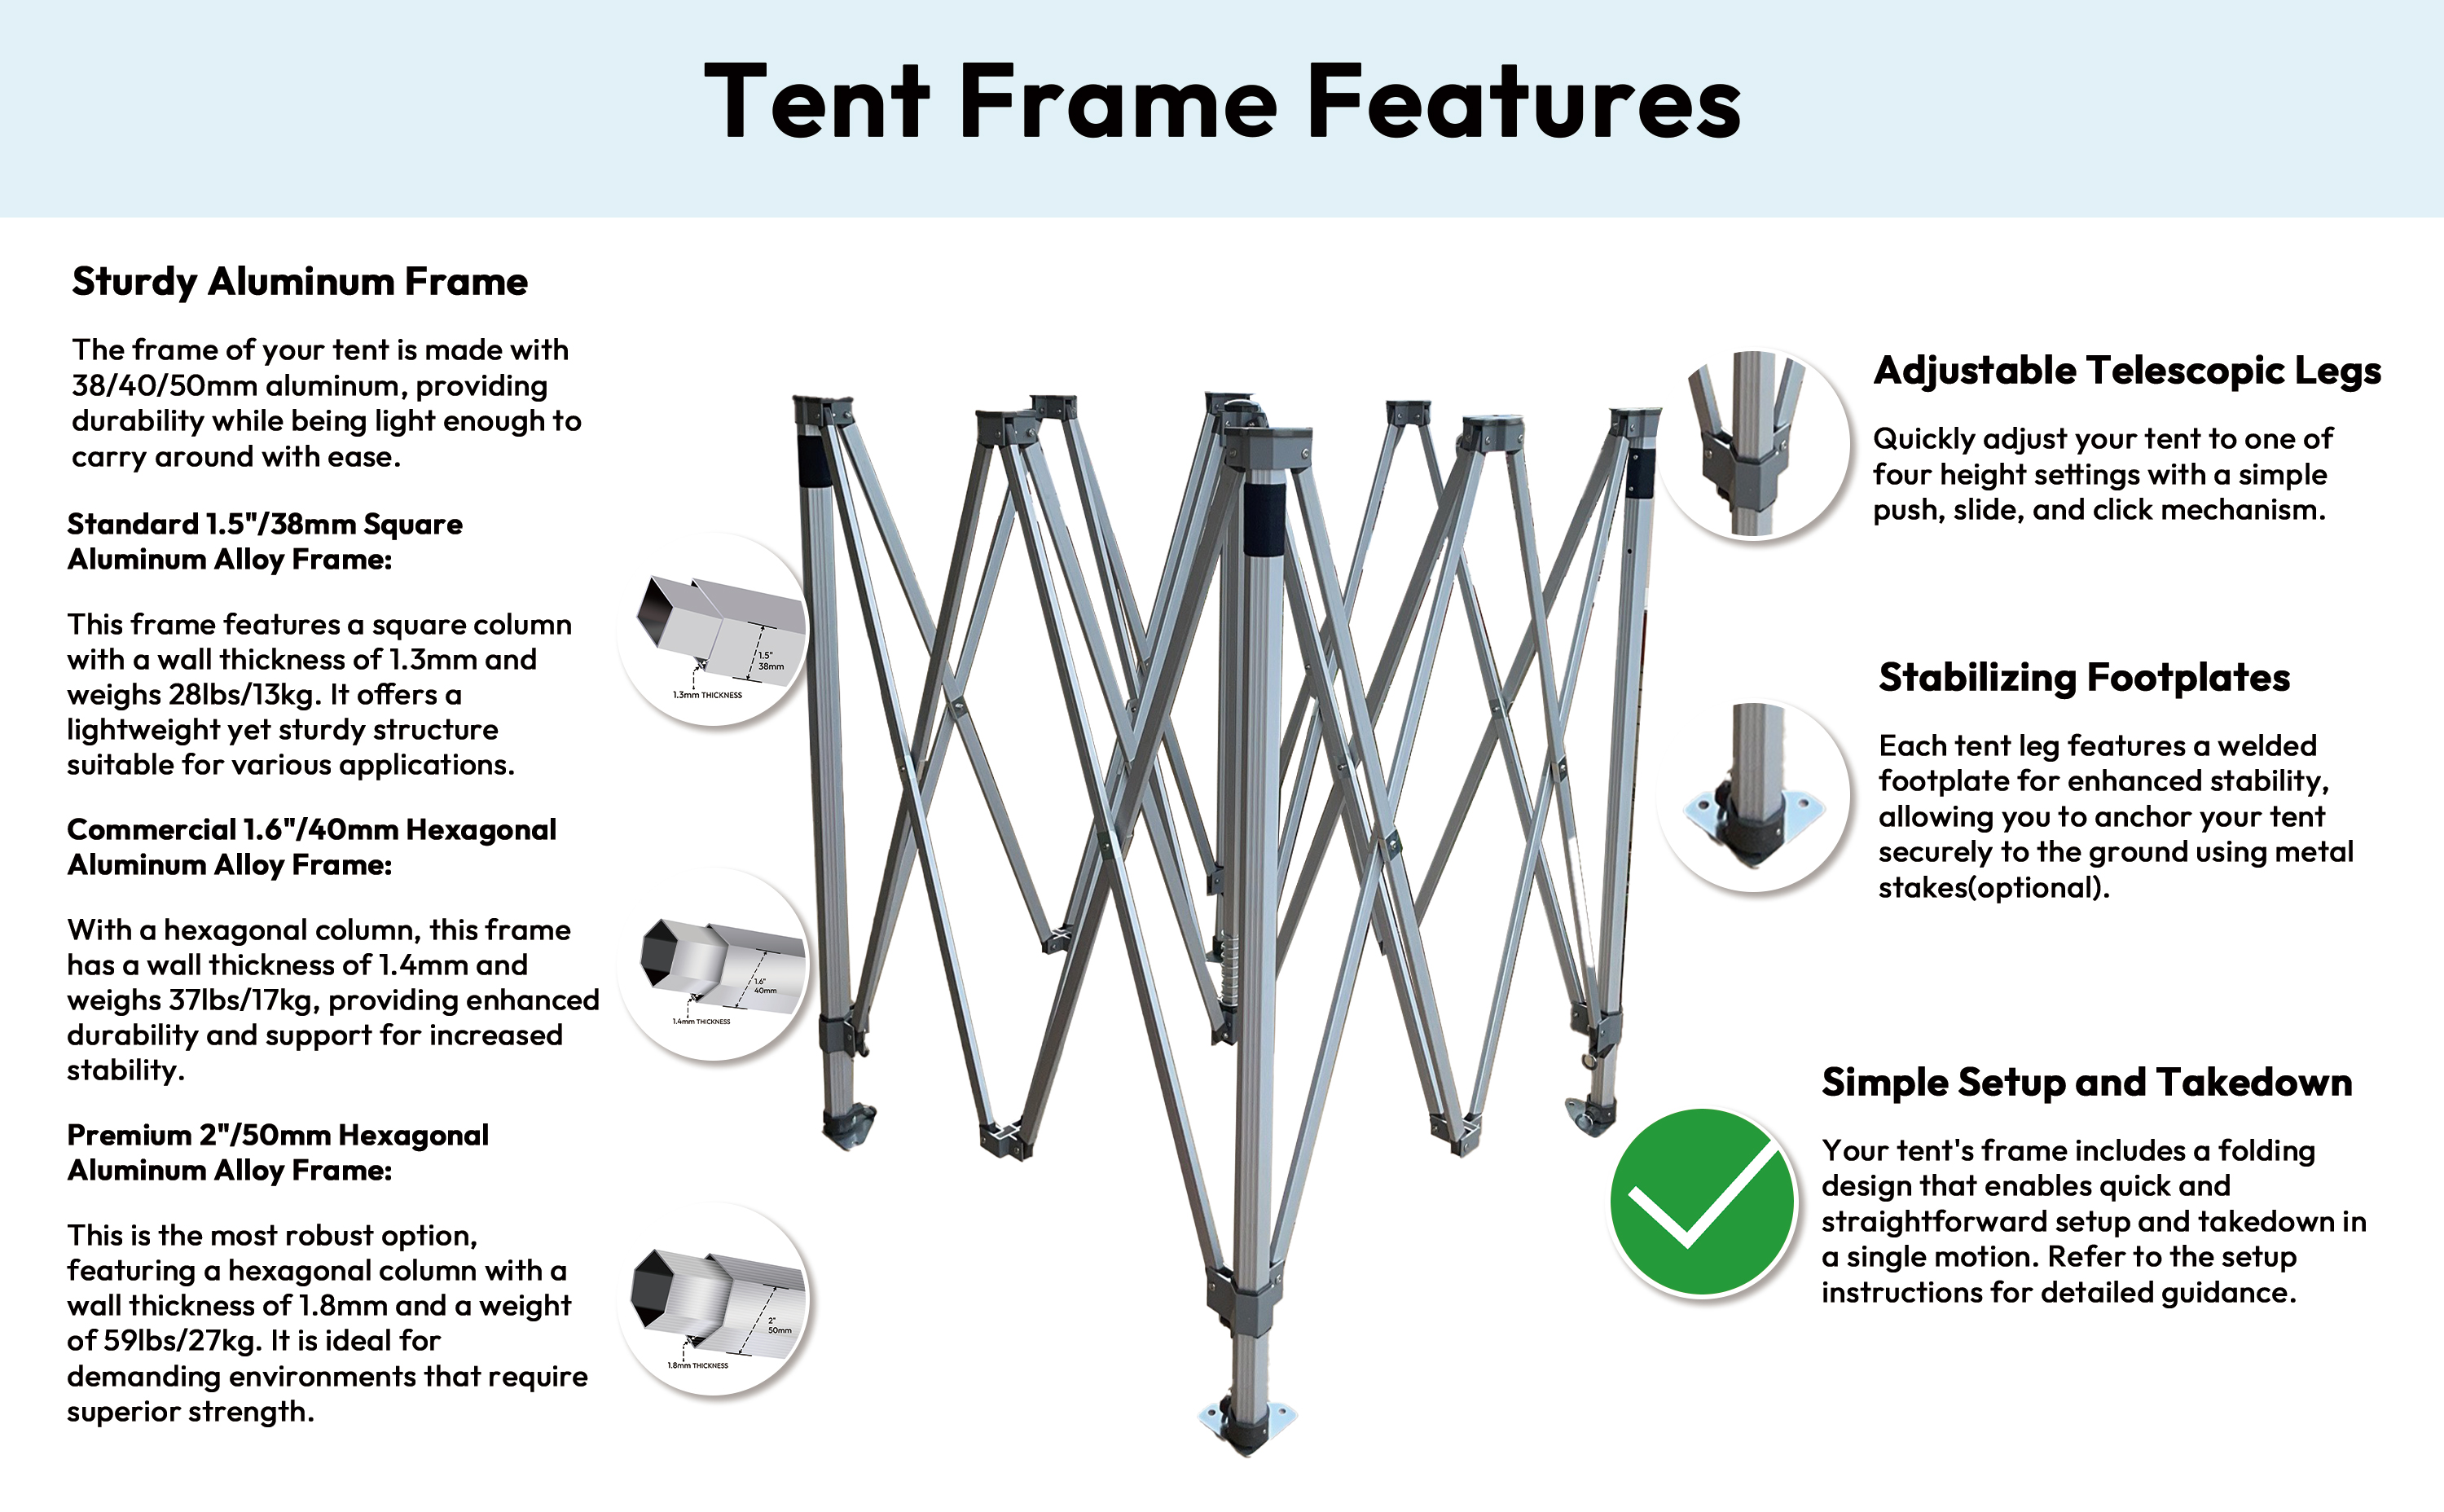 Custom Canopy Tent Frame Features